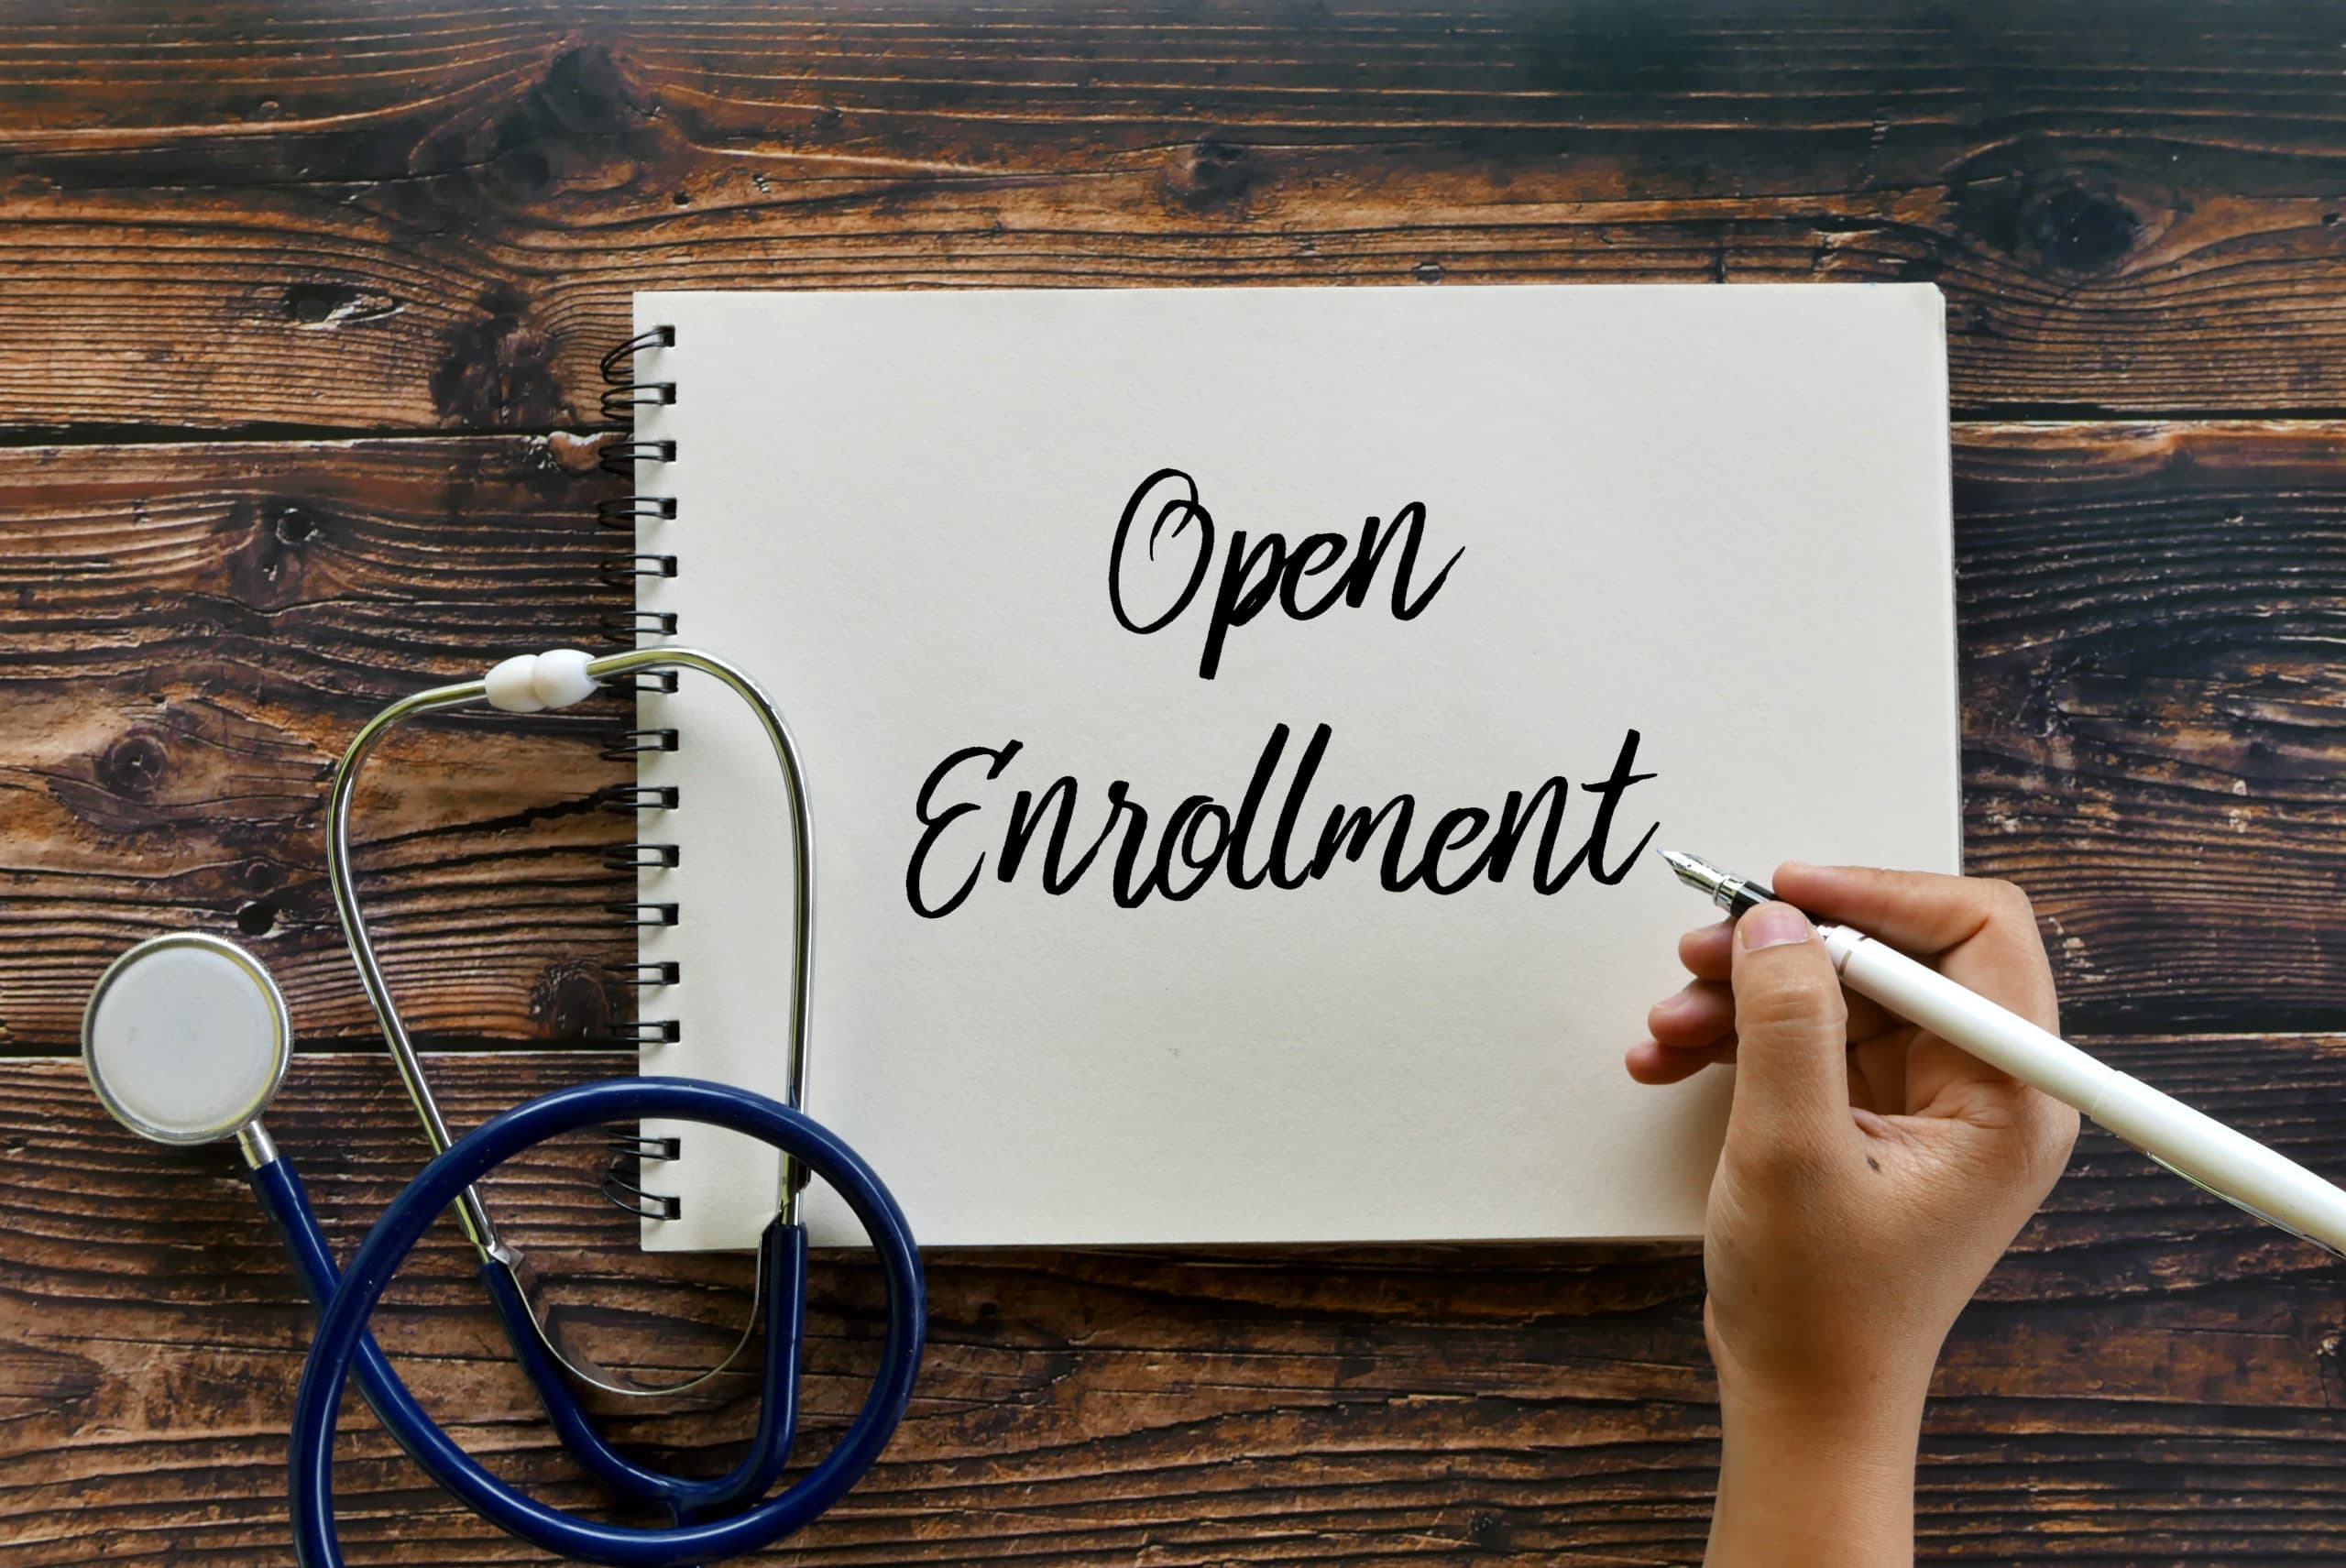 Top view of stethoscope and hand writing Open Enrollment on notebook on wooden background.